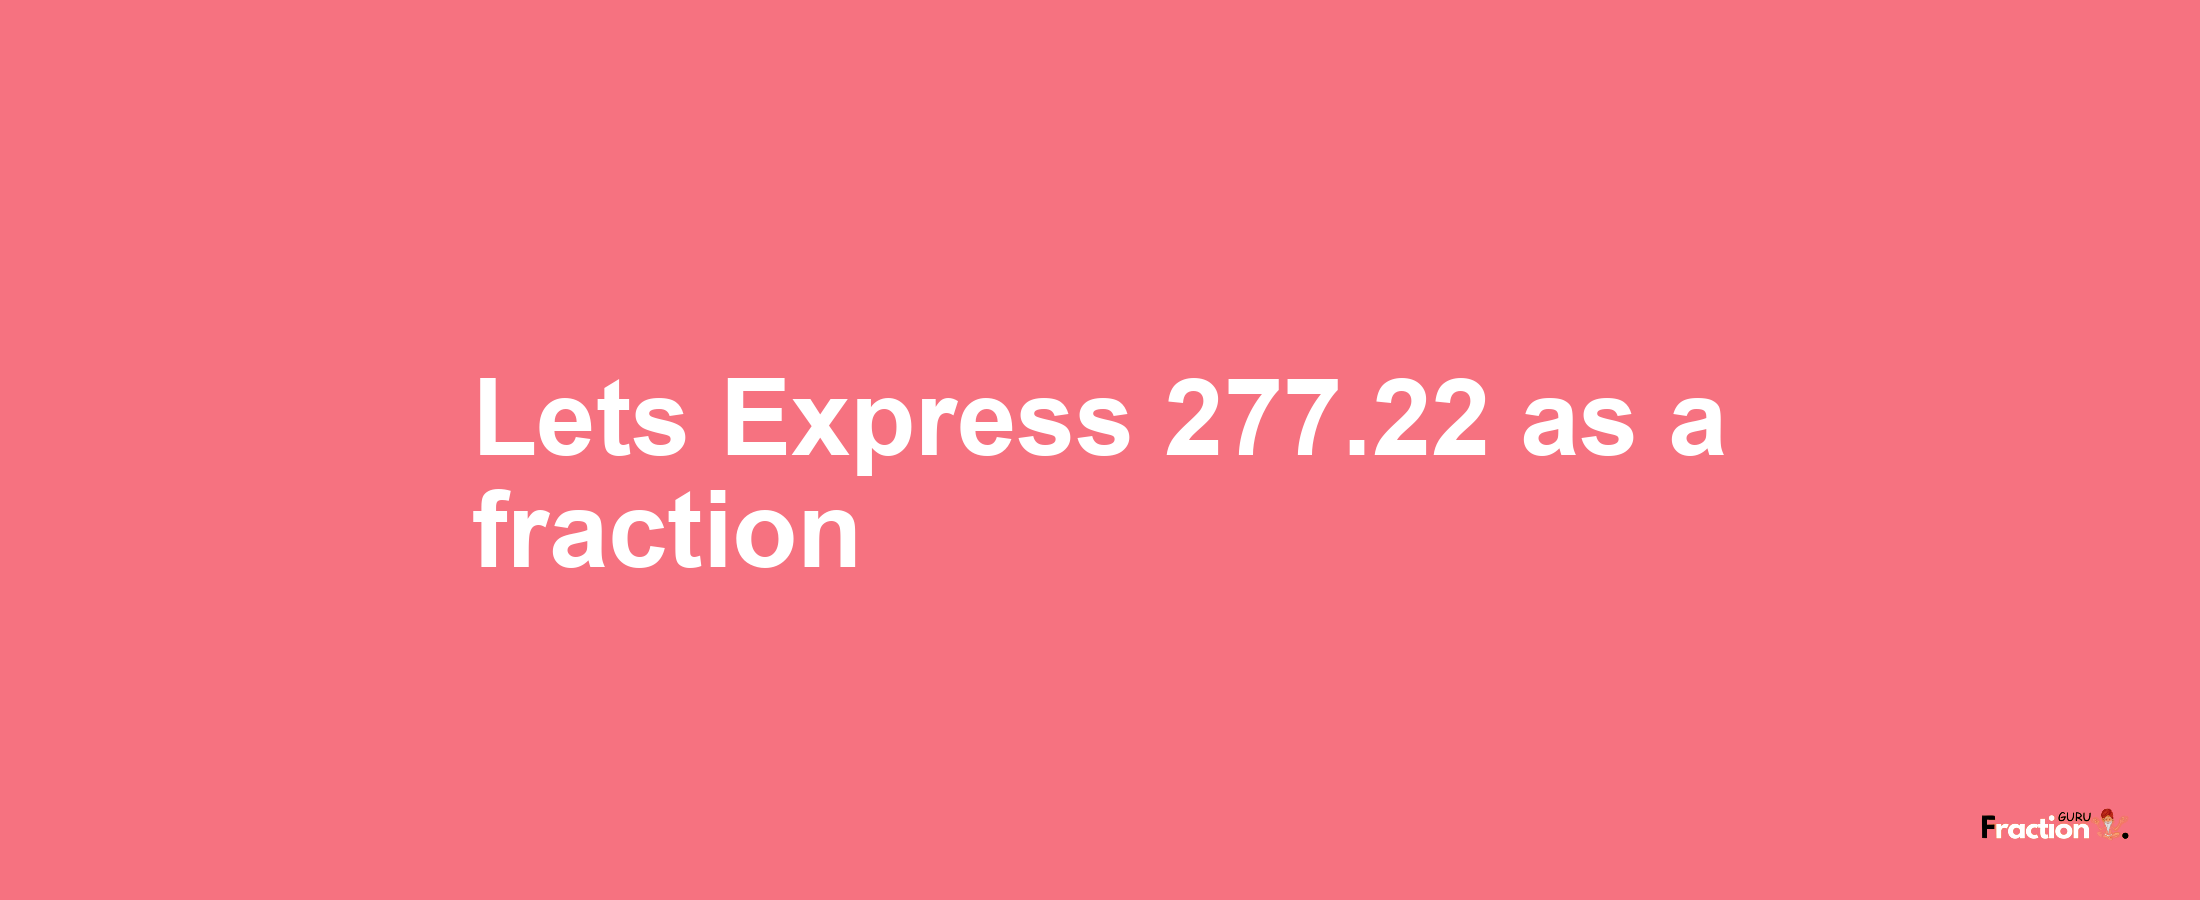 Lets Express 277.22 as afraction